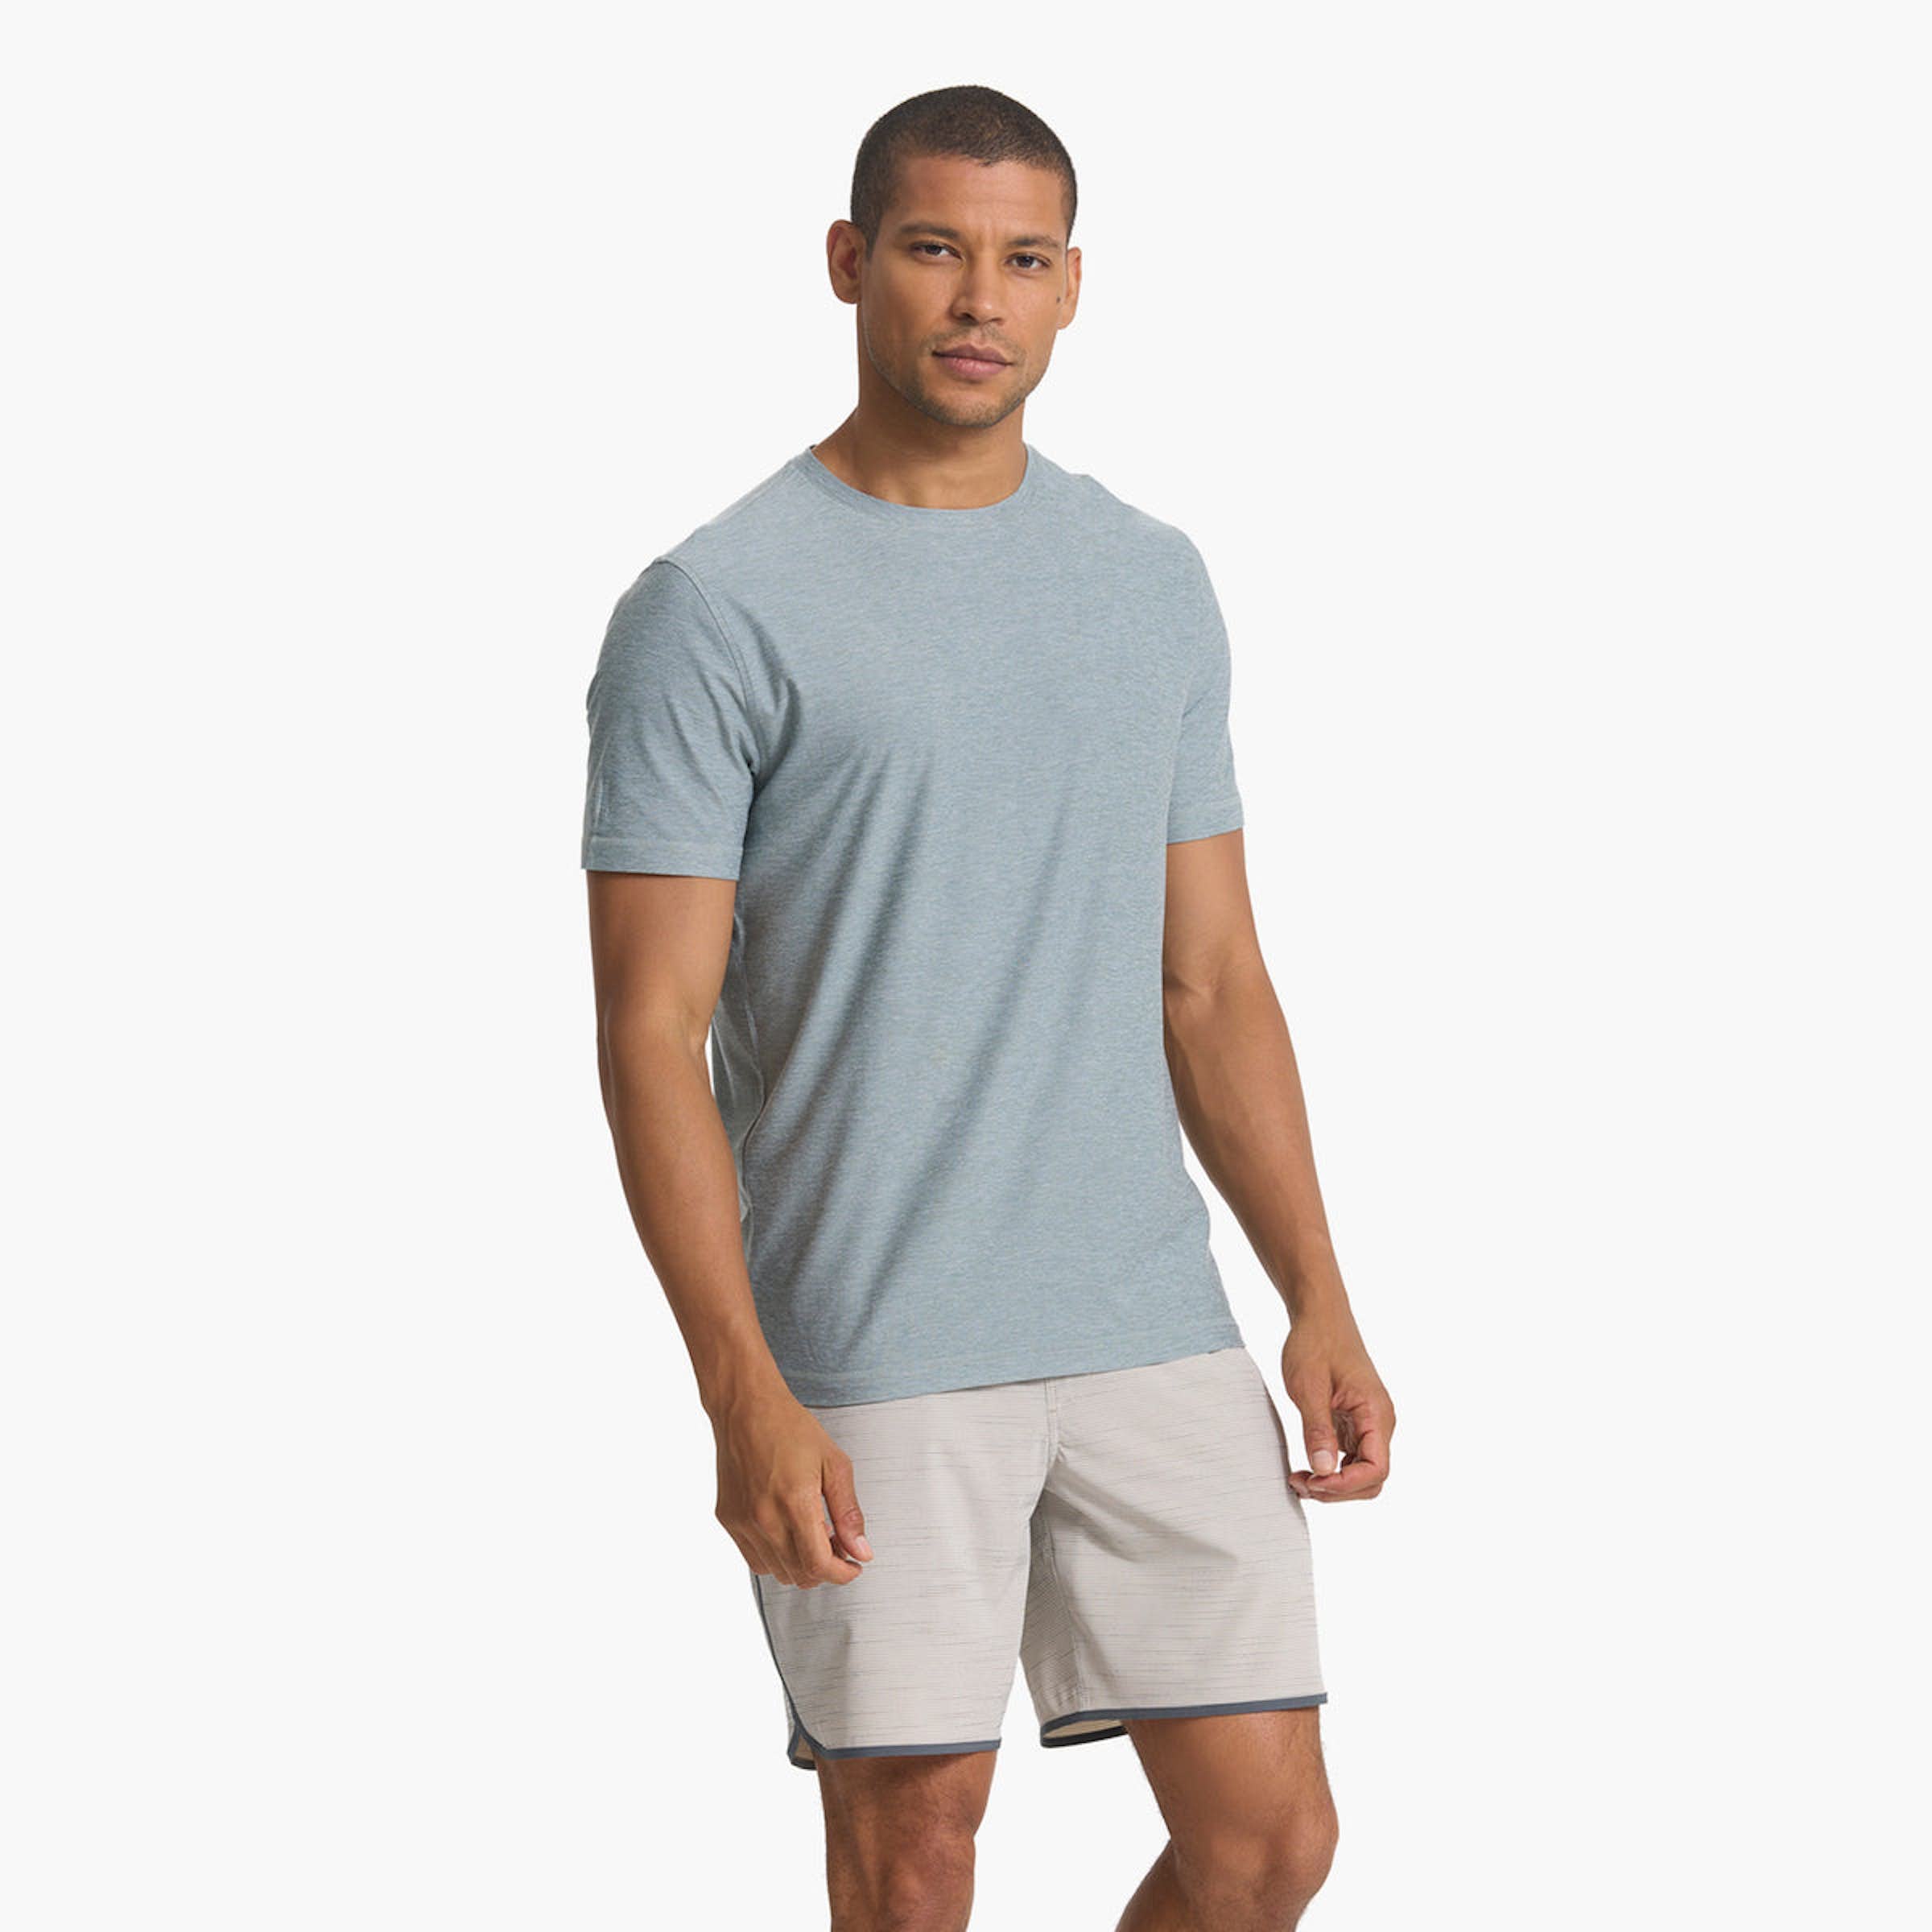 Shop Mens Clothing Online and In-Store | Weitzenkorns | Phoenixville, PA